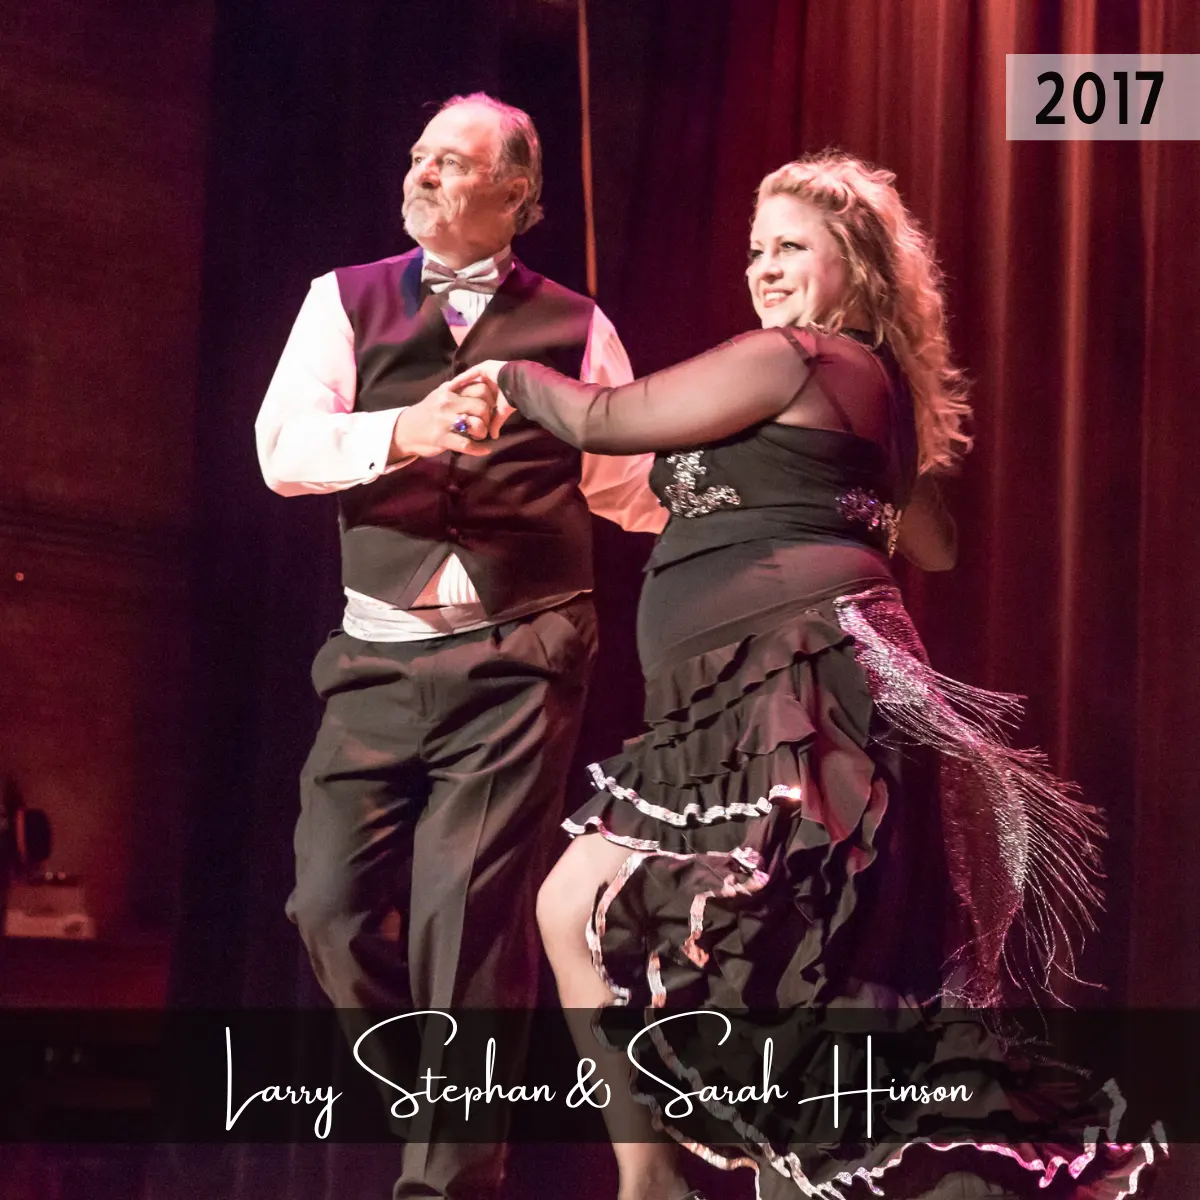 2017 Hall of Fame - Larry Stephan and Sarah Hinson